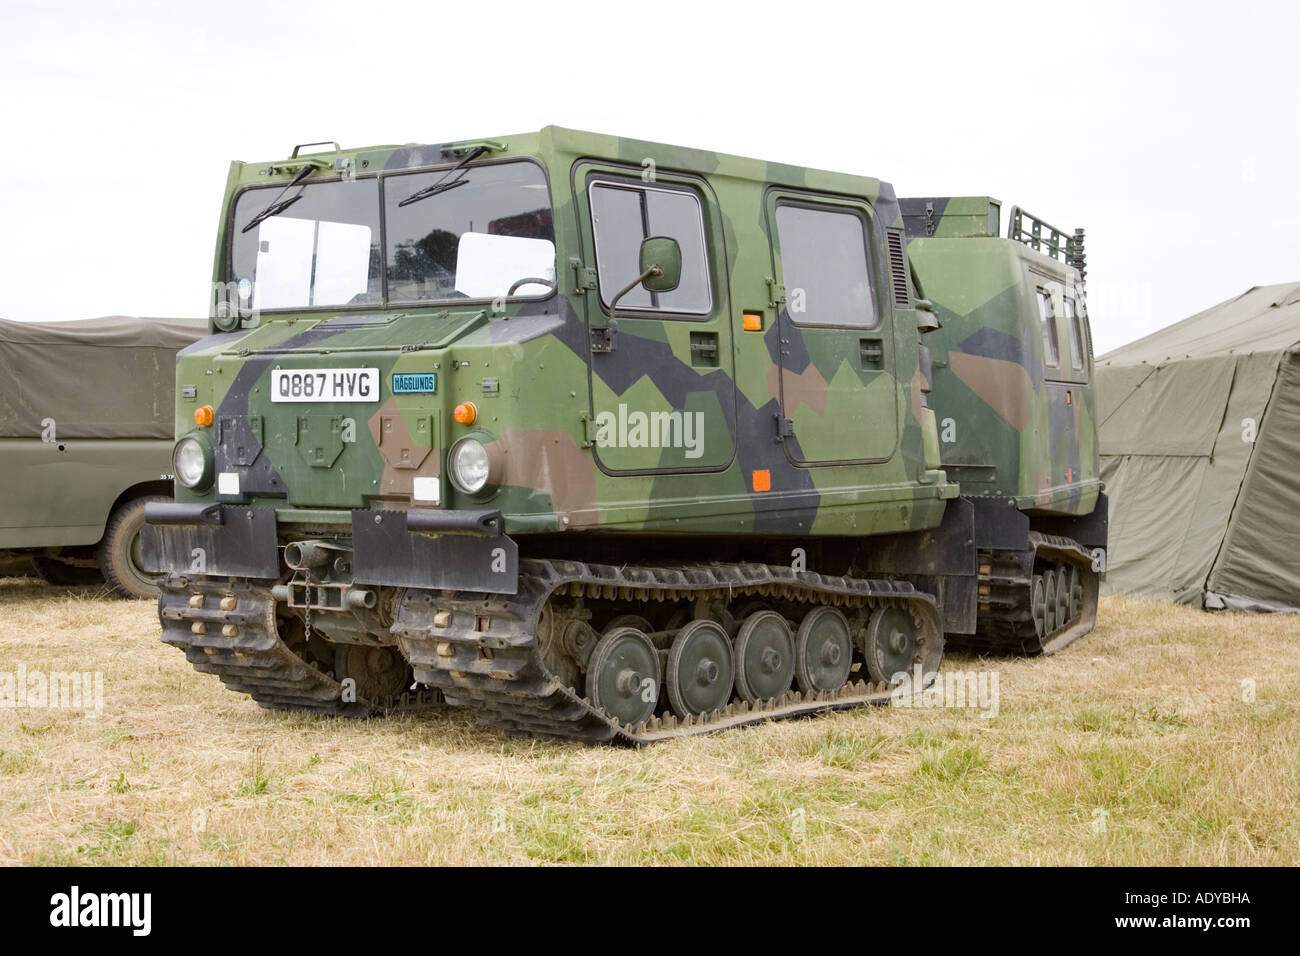 Hagglunds BV206 tracked véhicule tout-terrain Banque D'Images